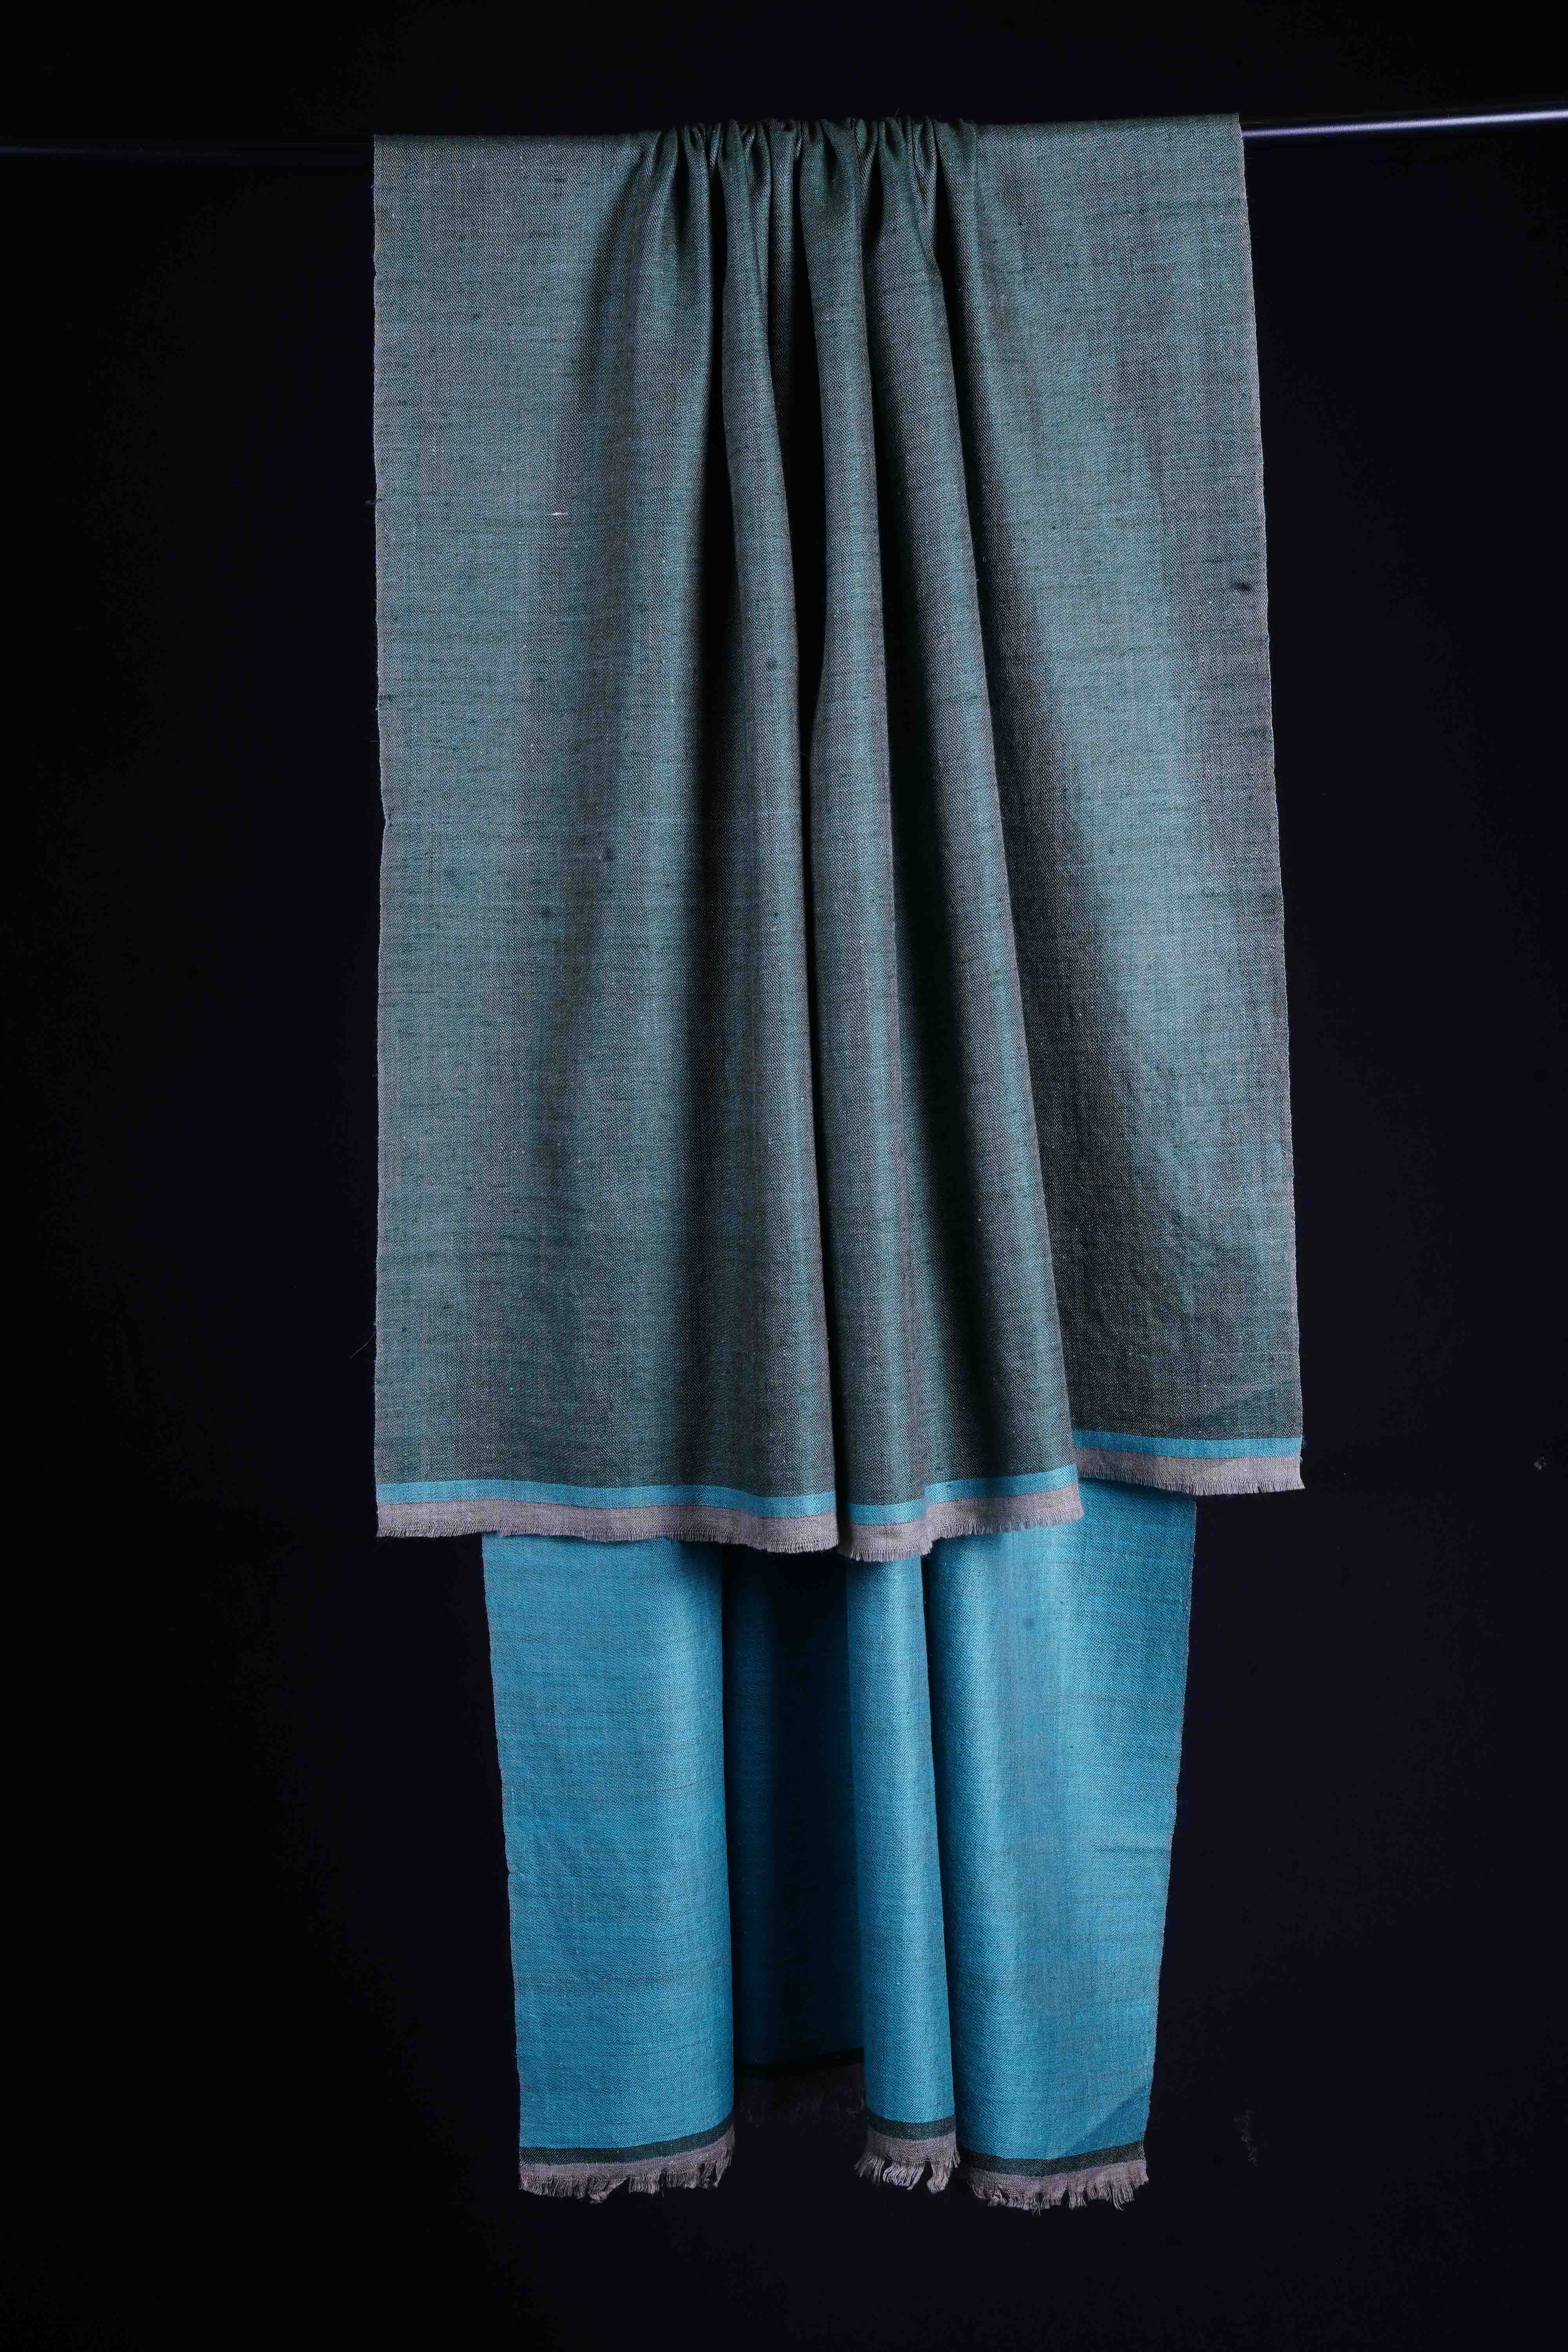 Reversible Green and Turquoise Handwoven Cashmere Pashmina Shawl